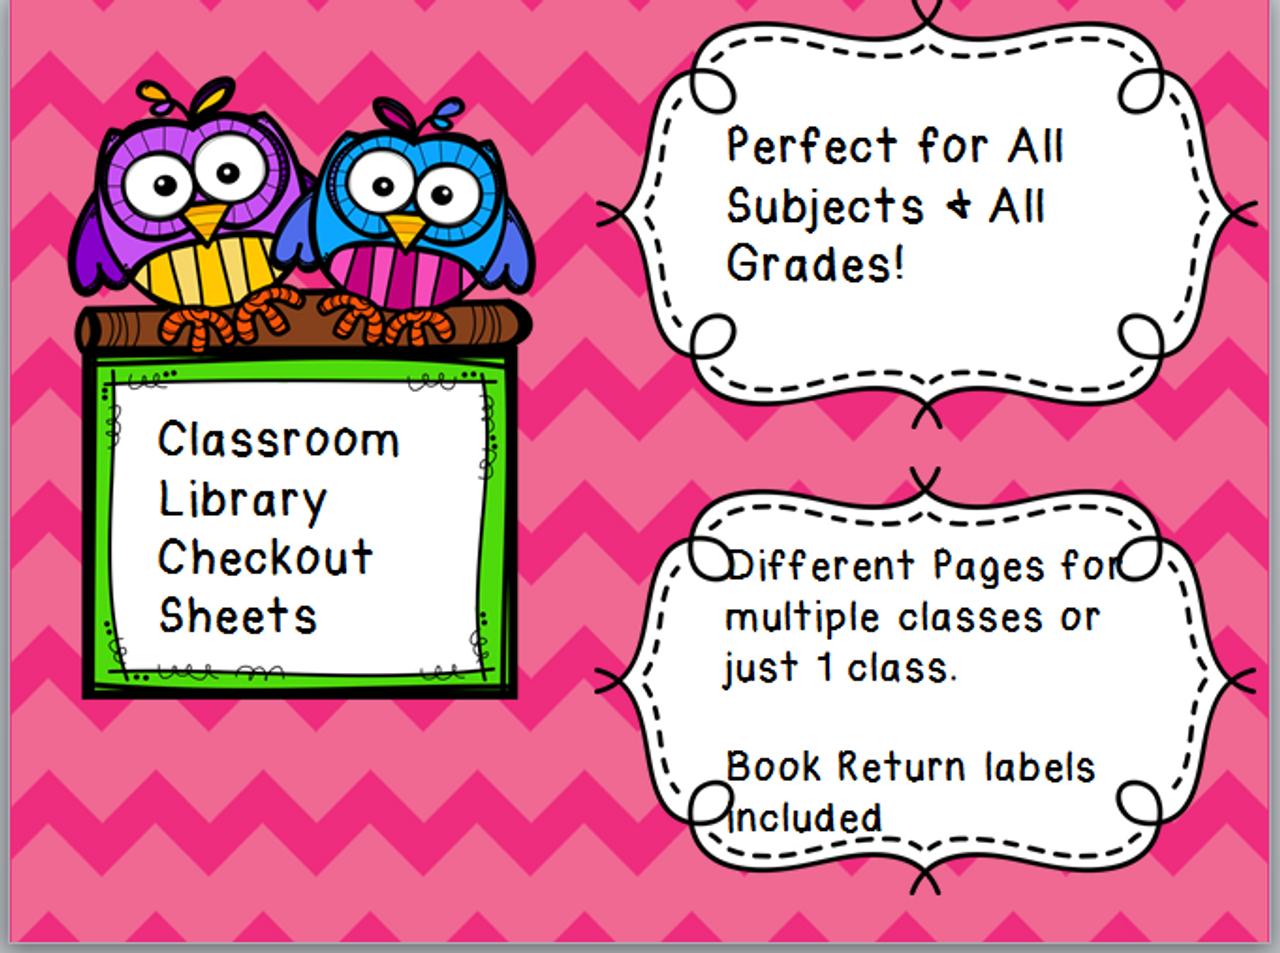 Classroom Library Checkout Sheet (All Grades) & Book Return Label